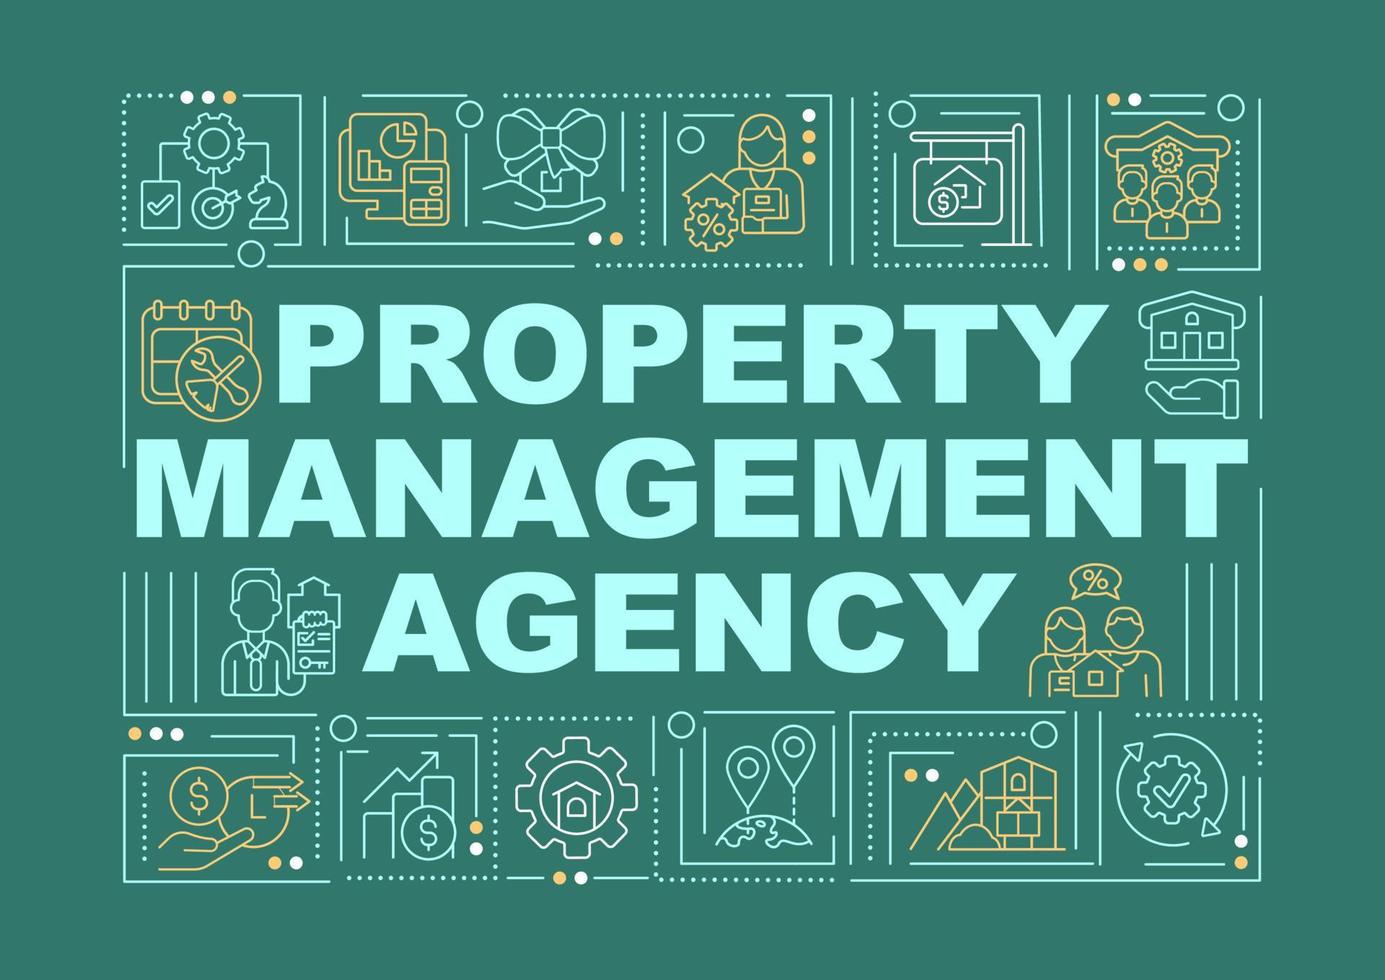 Property management agency word concepts green banner. Rental estate. Infographics with linear icons on background. Isolated typography. Vector color illustration with text.